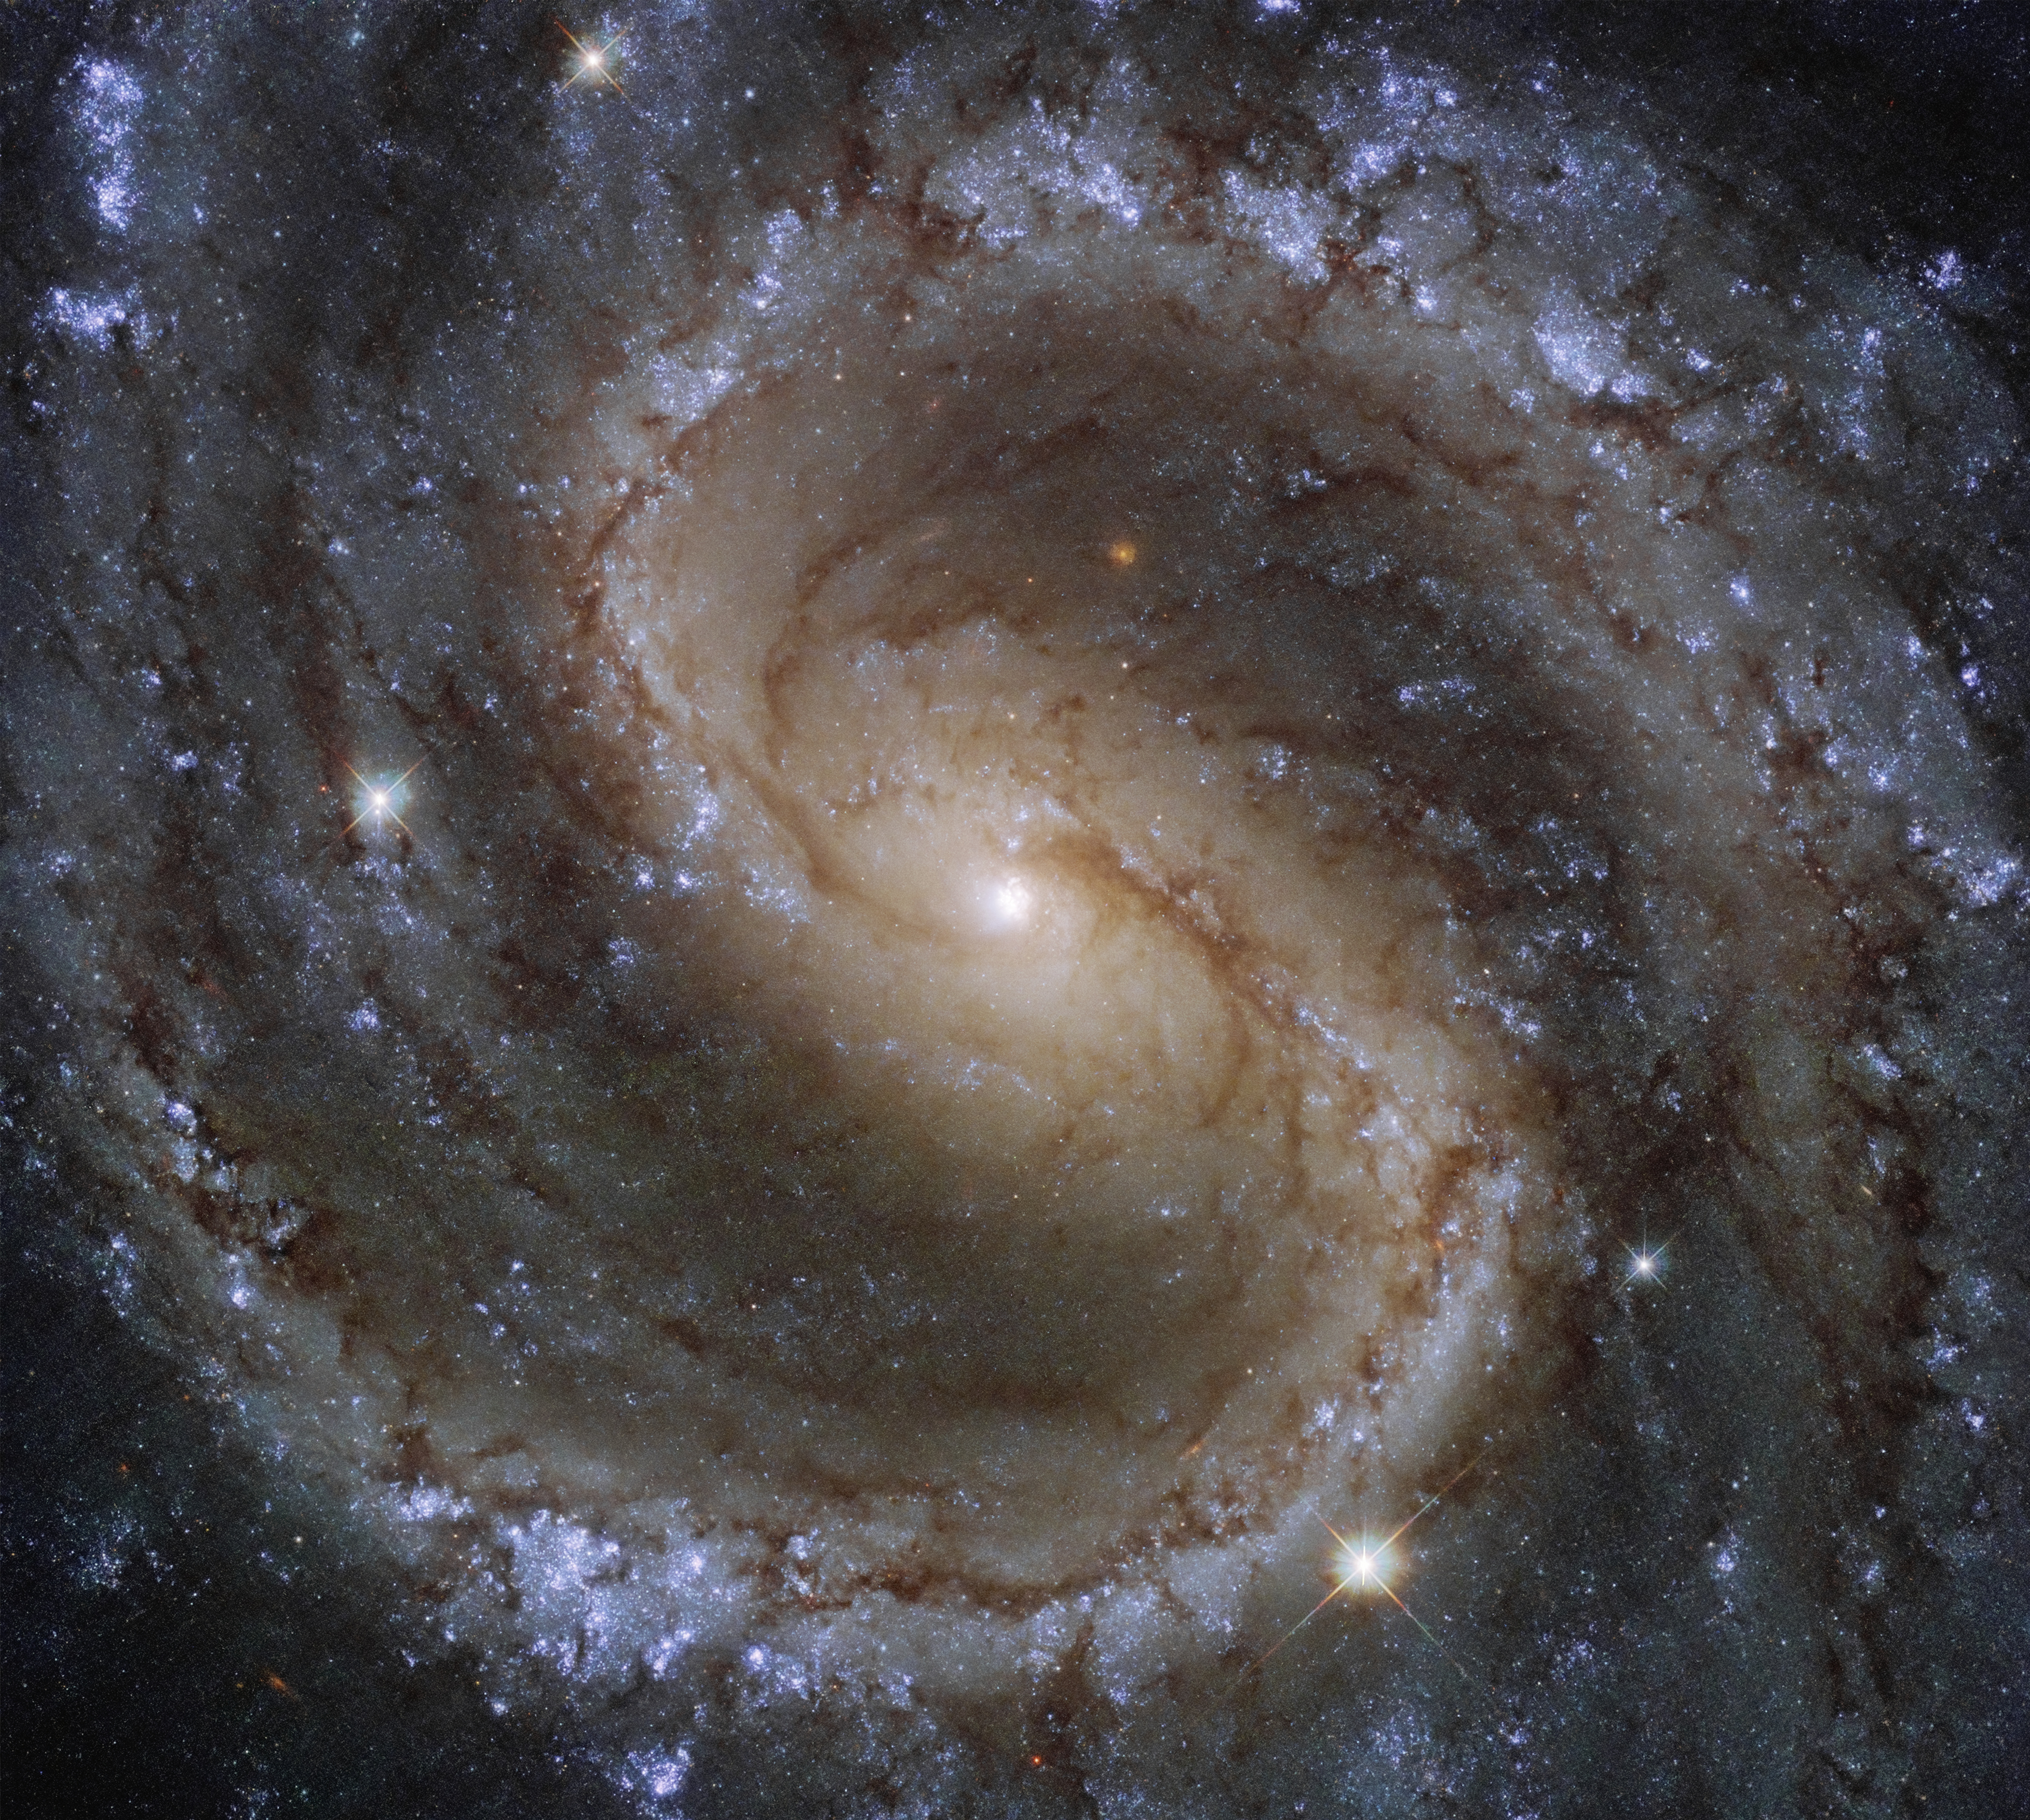 Arms swirl of new blue stars around a central region of older yellow stars in this galaxy image.